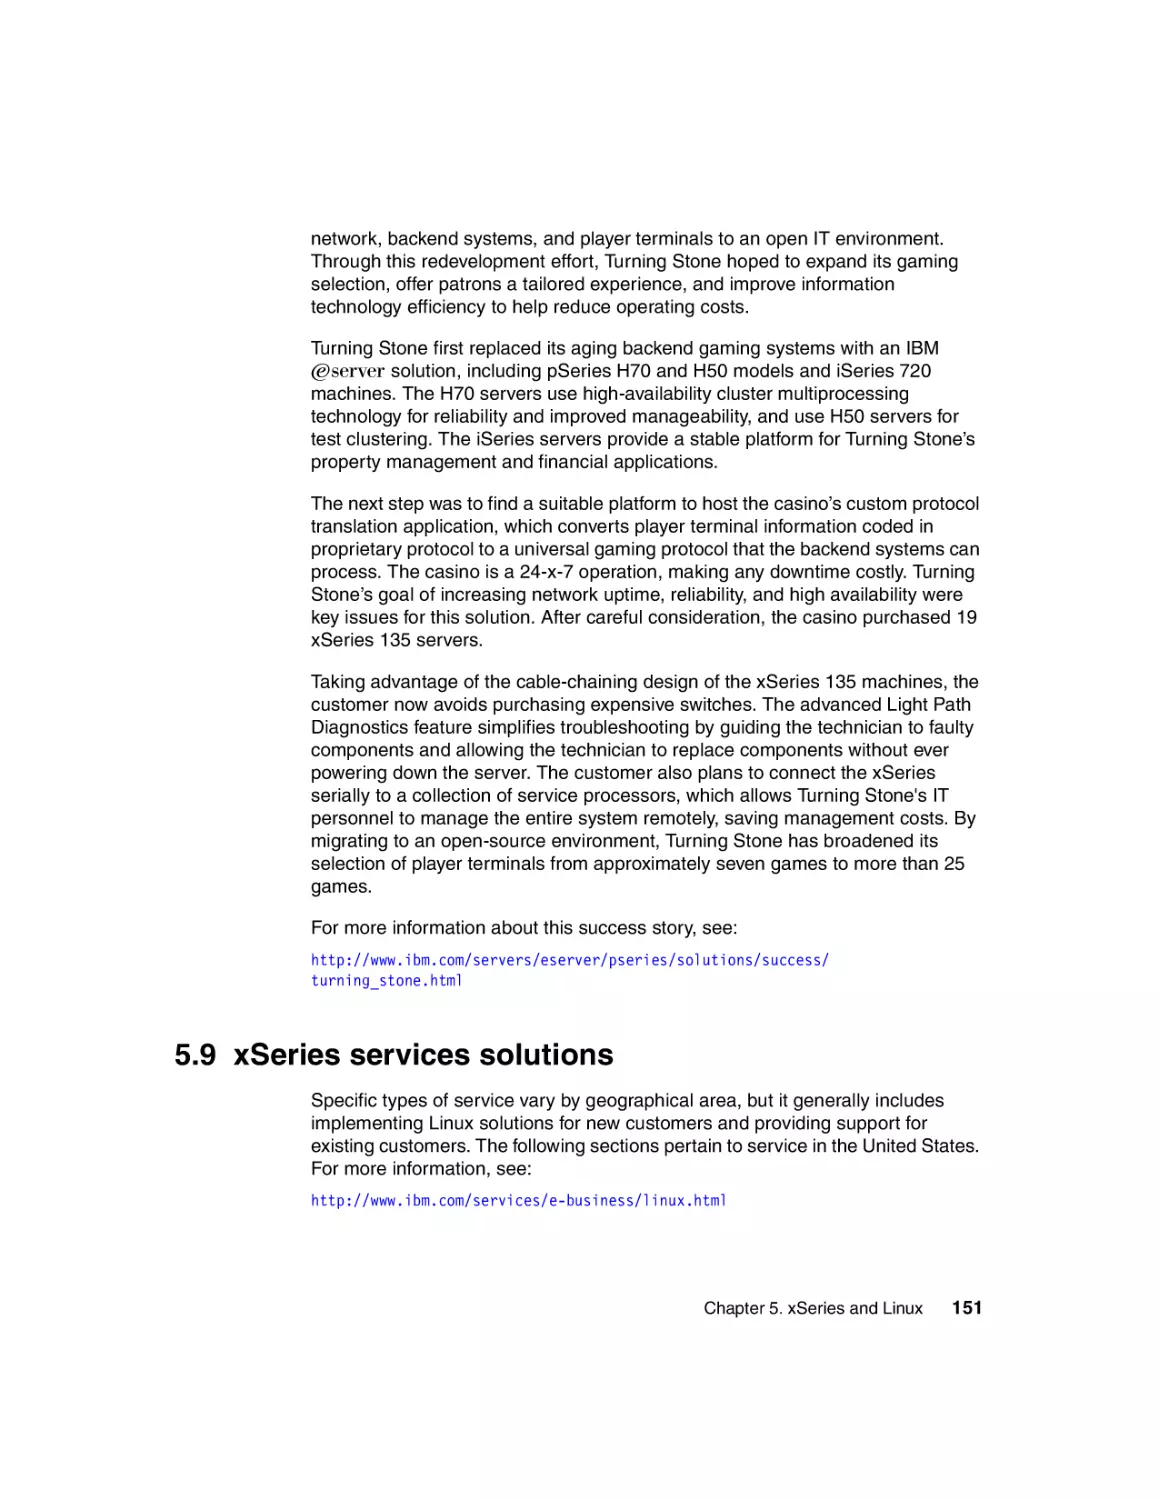 5.9 xSeries services solutions